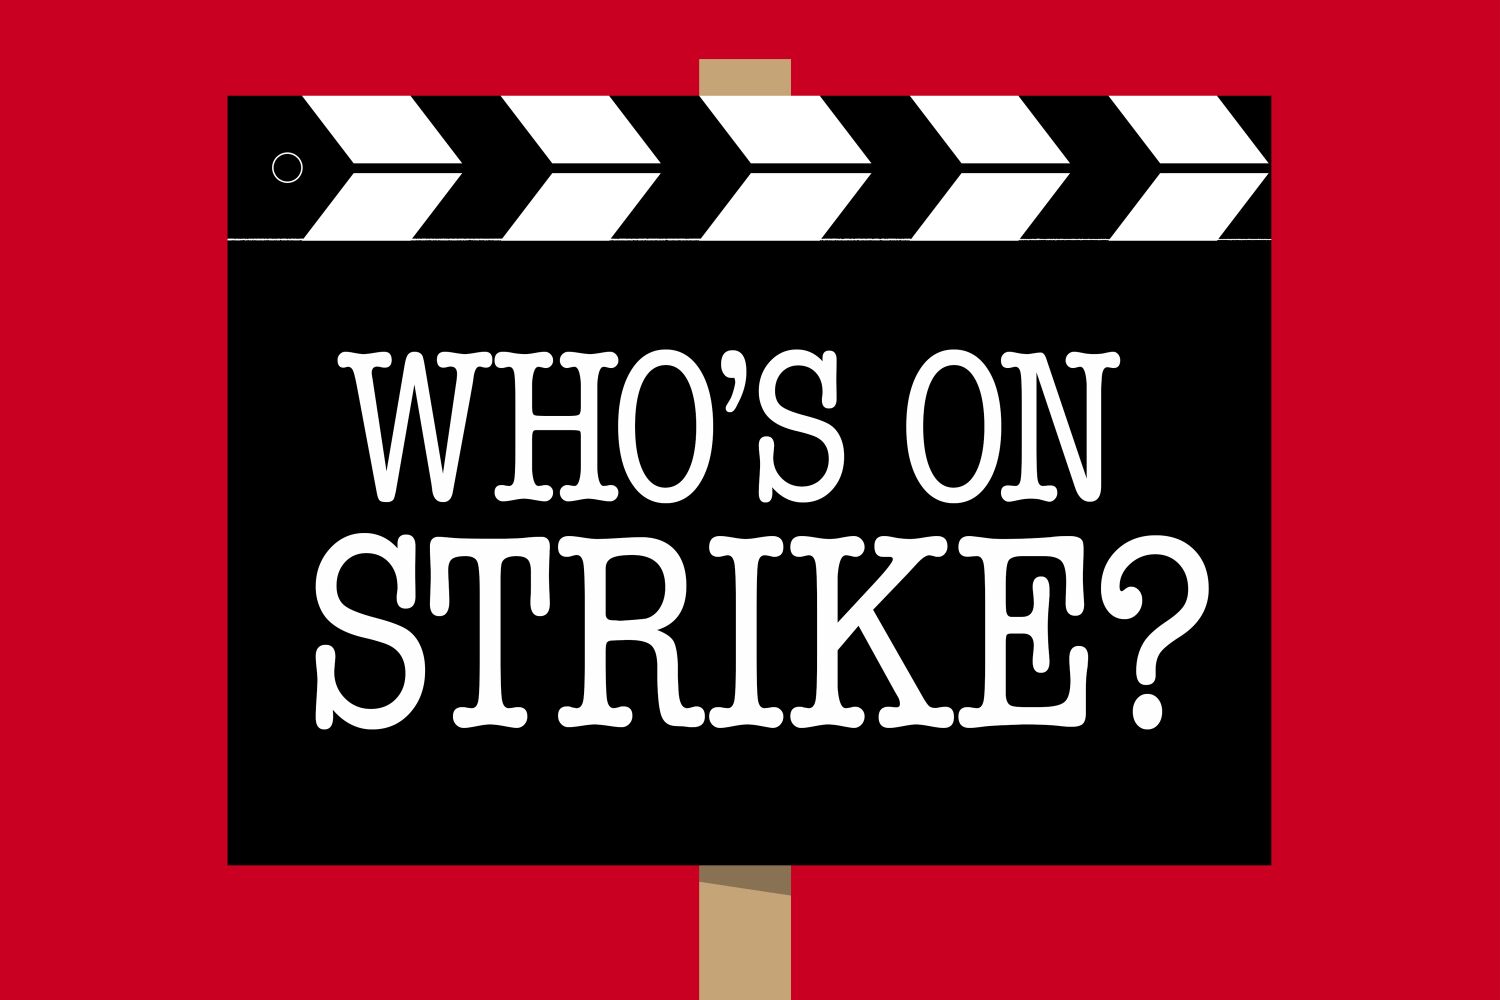 Who's on strike in Hollywood? Roll the credits and find out